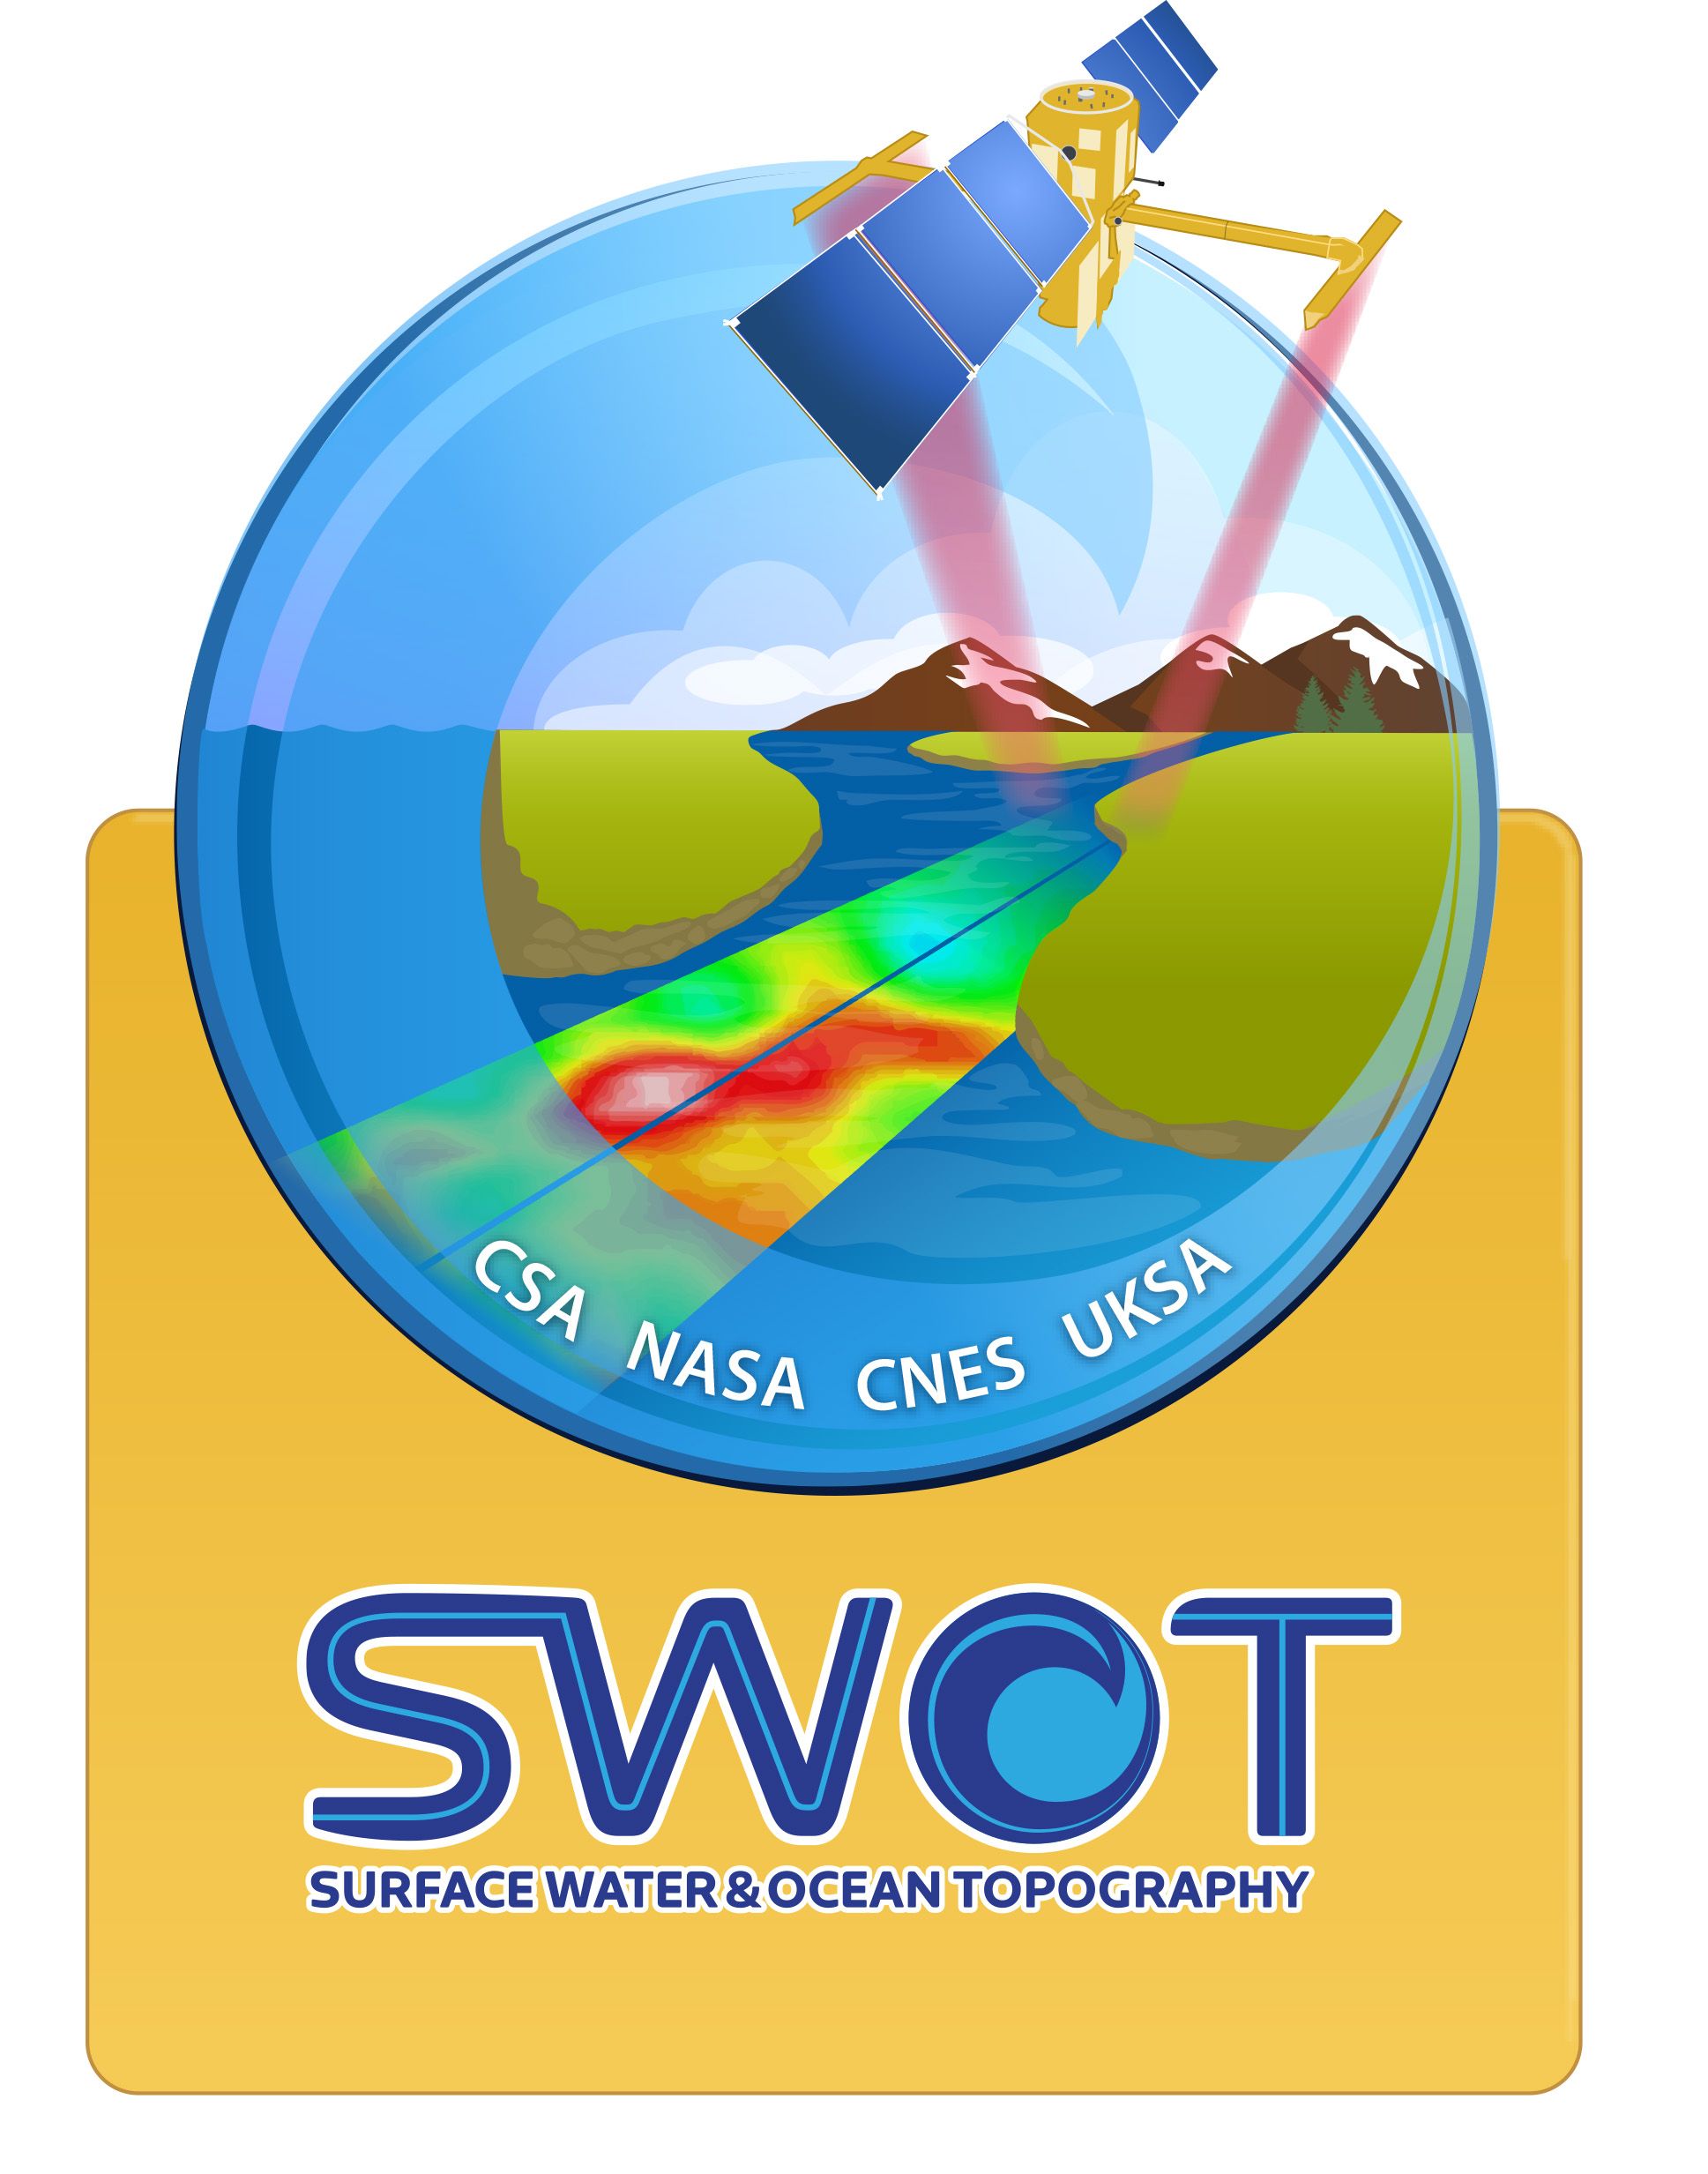 SWOT mission emblem showing the participation of four national space agencies: NASA, the CNES (French Space Agency), the UK Space Agency, and Canadian Space Agency